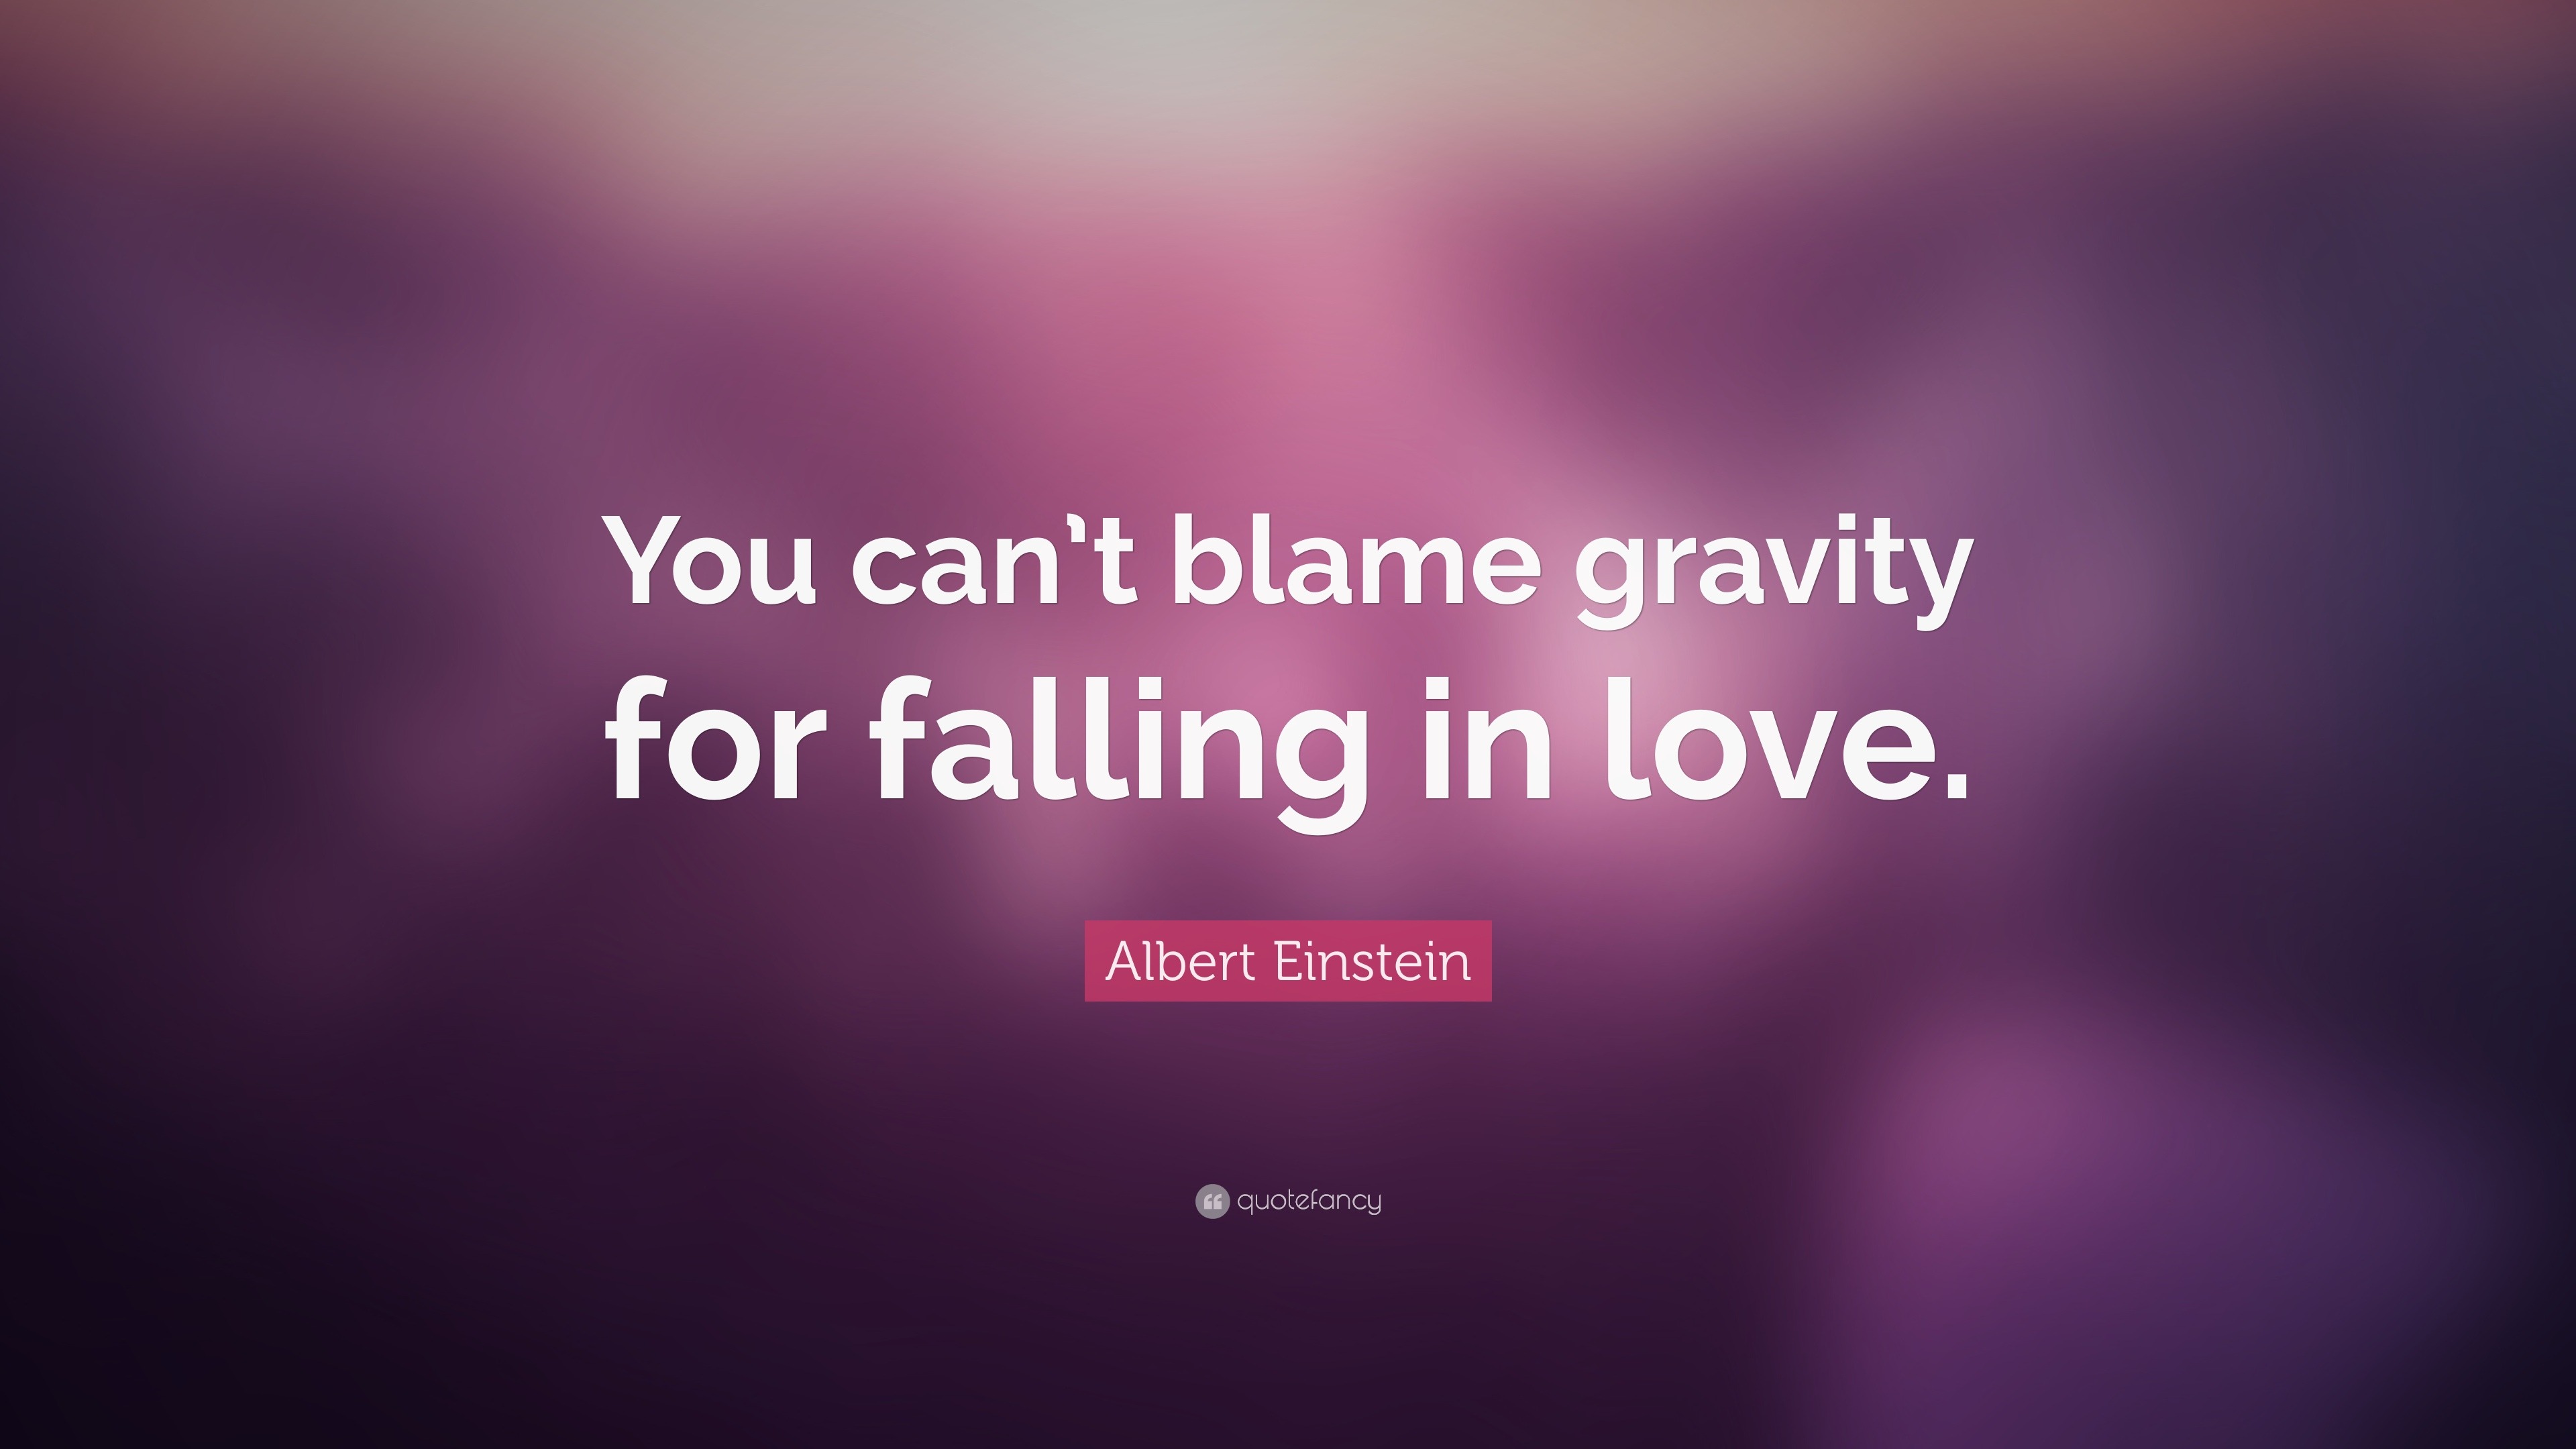 Albert Einstein Quote: “You can’t blame gravity for falling in love.”